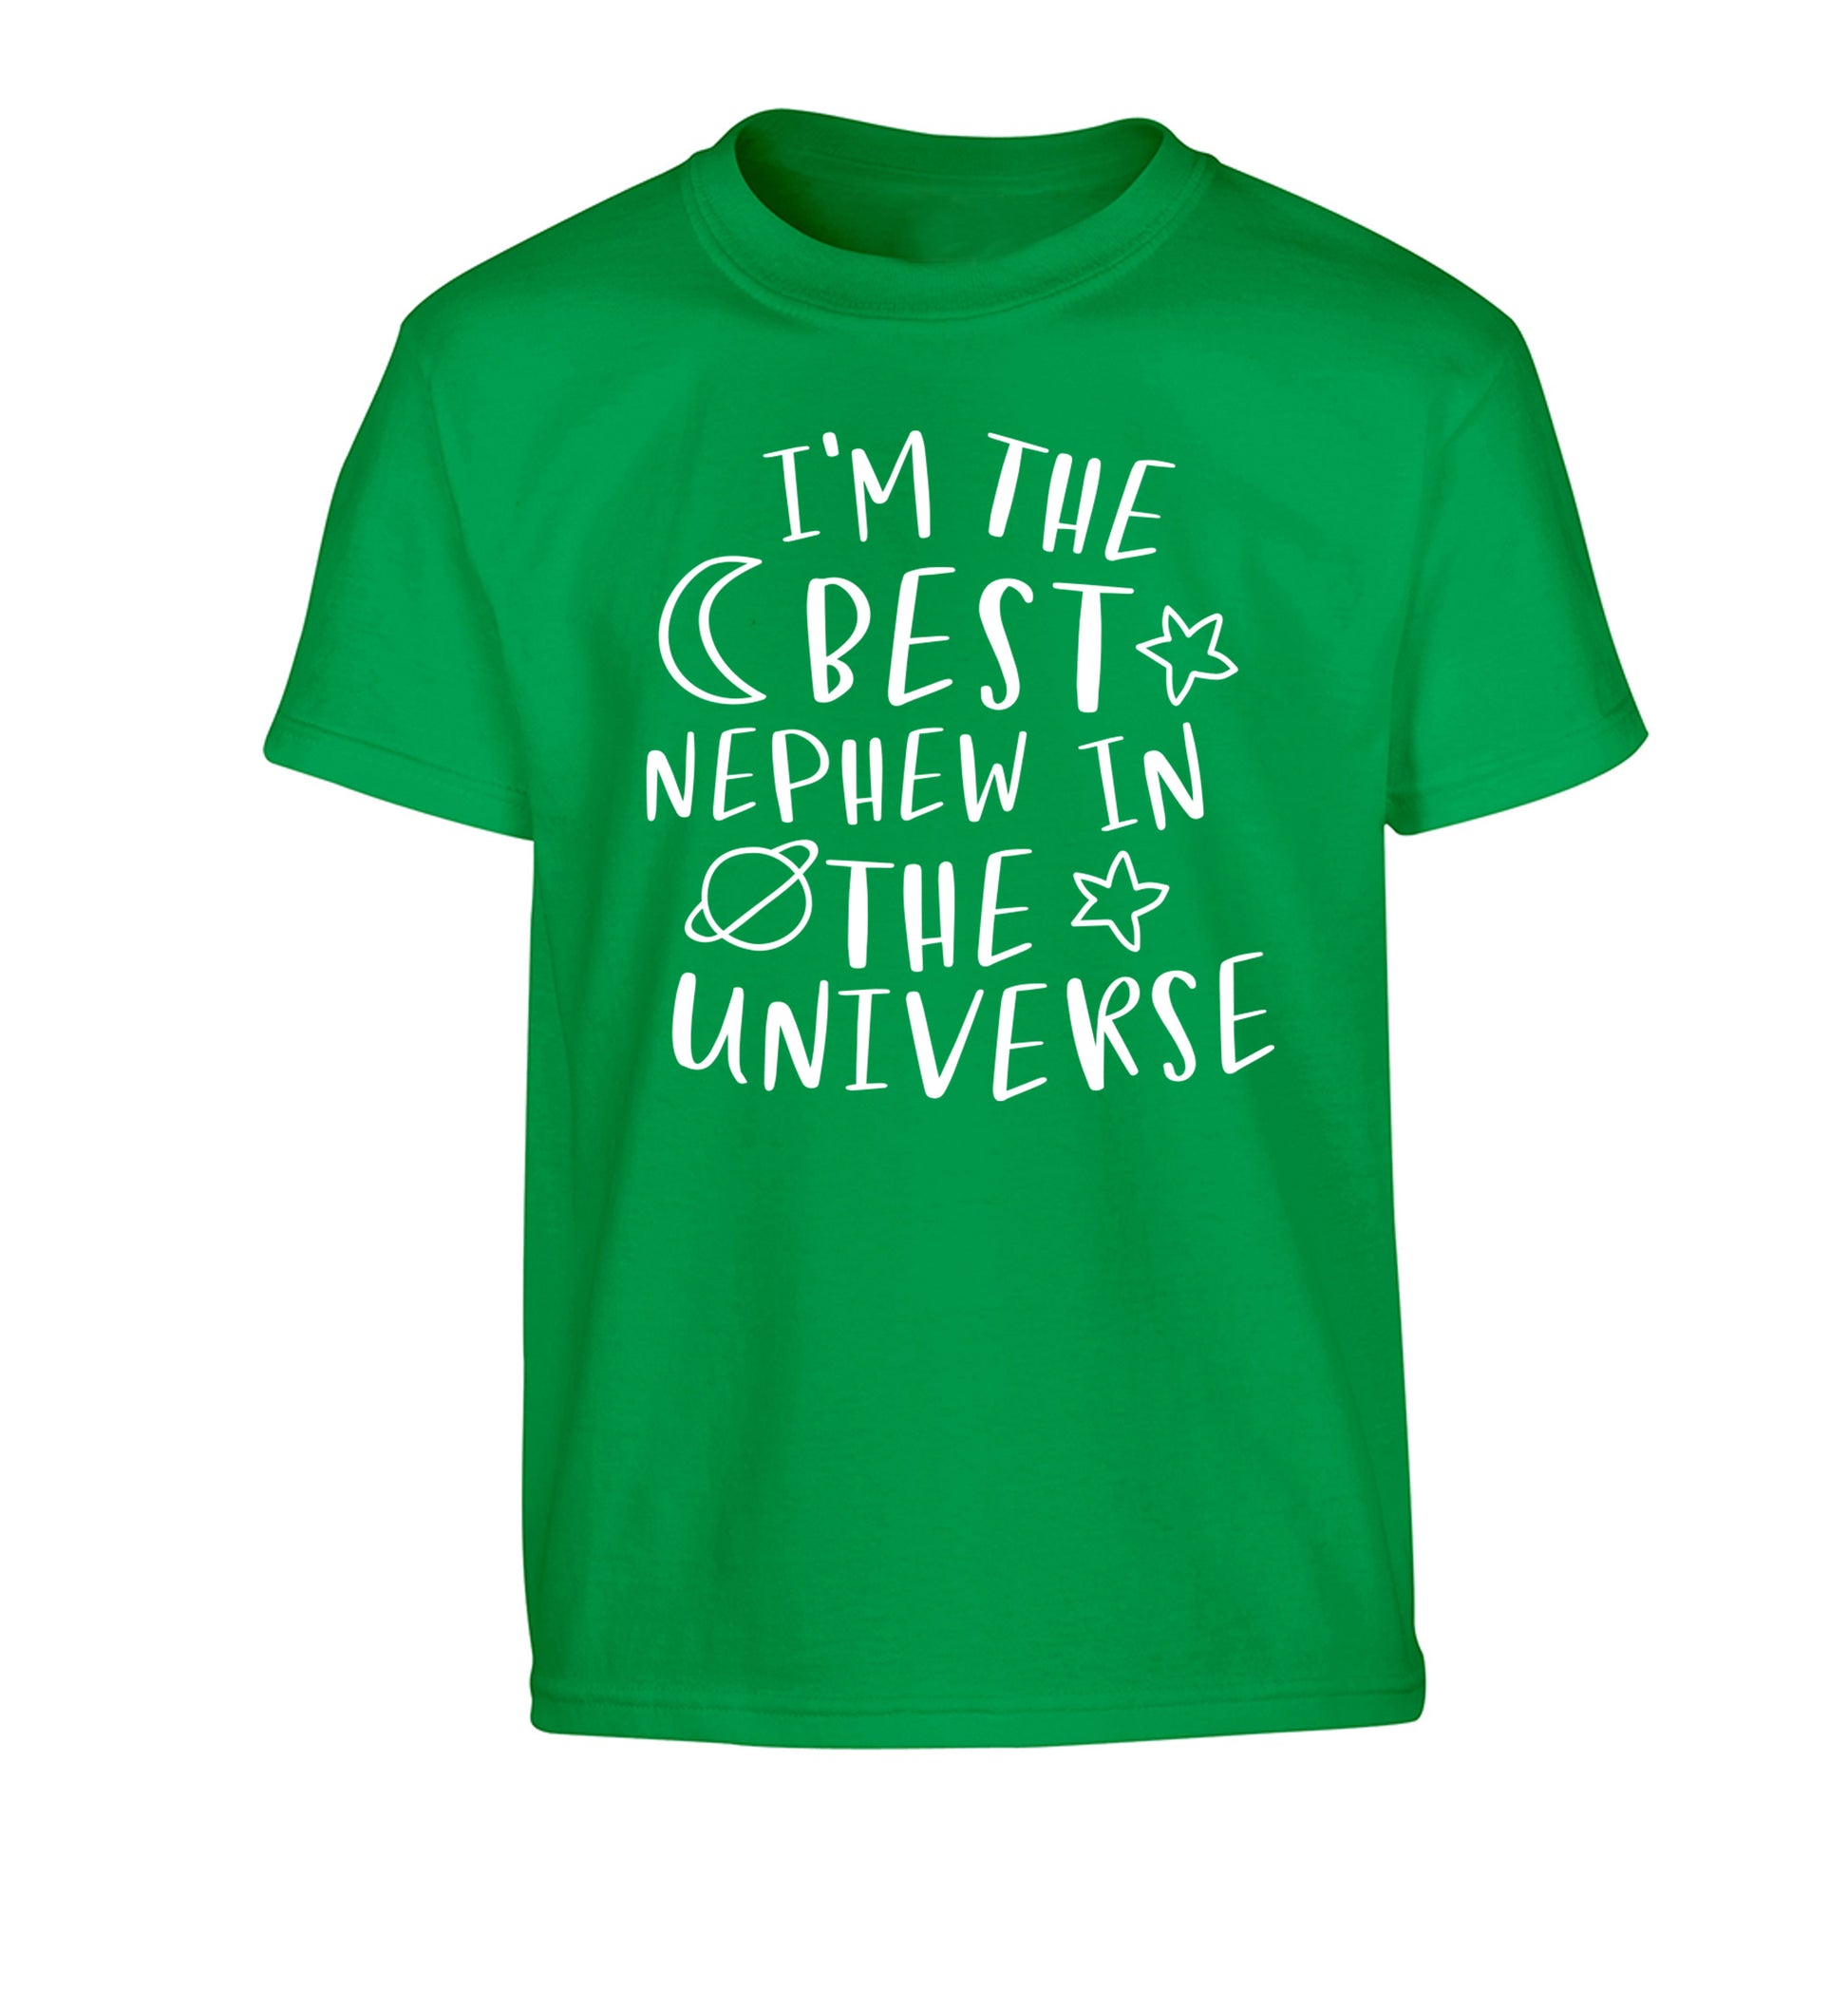 I'm the best nephew in the universe Children's green Tshirt 12-13 Years